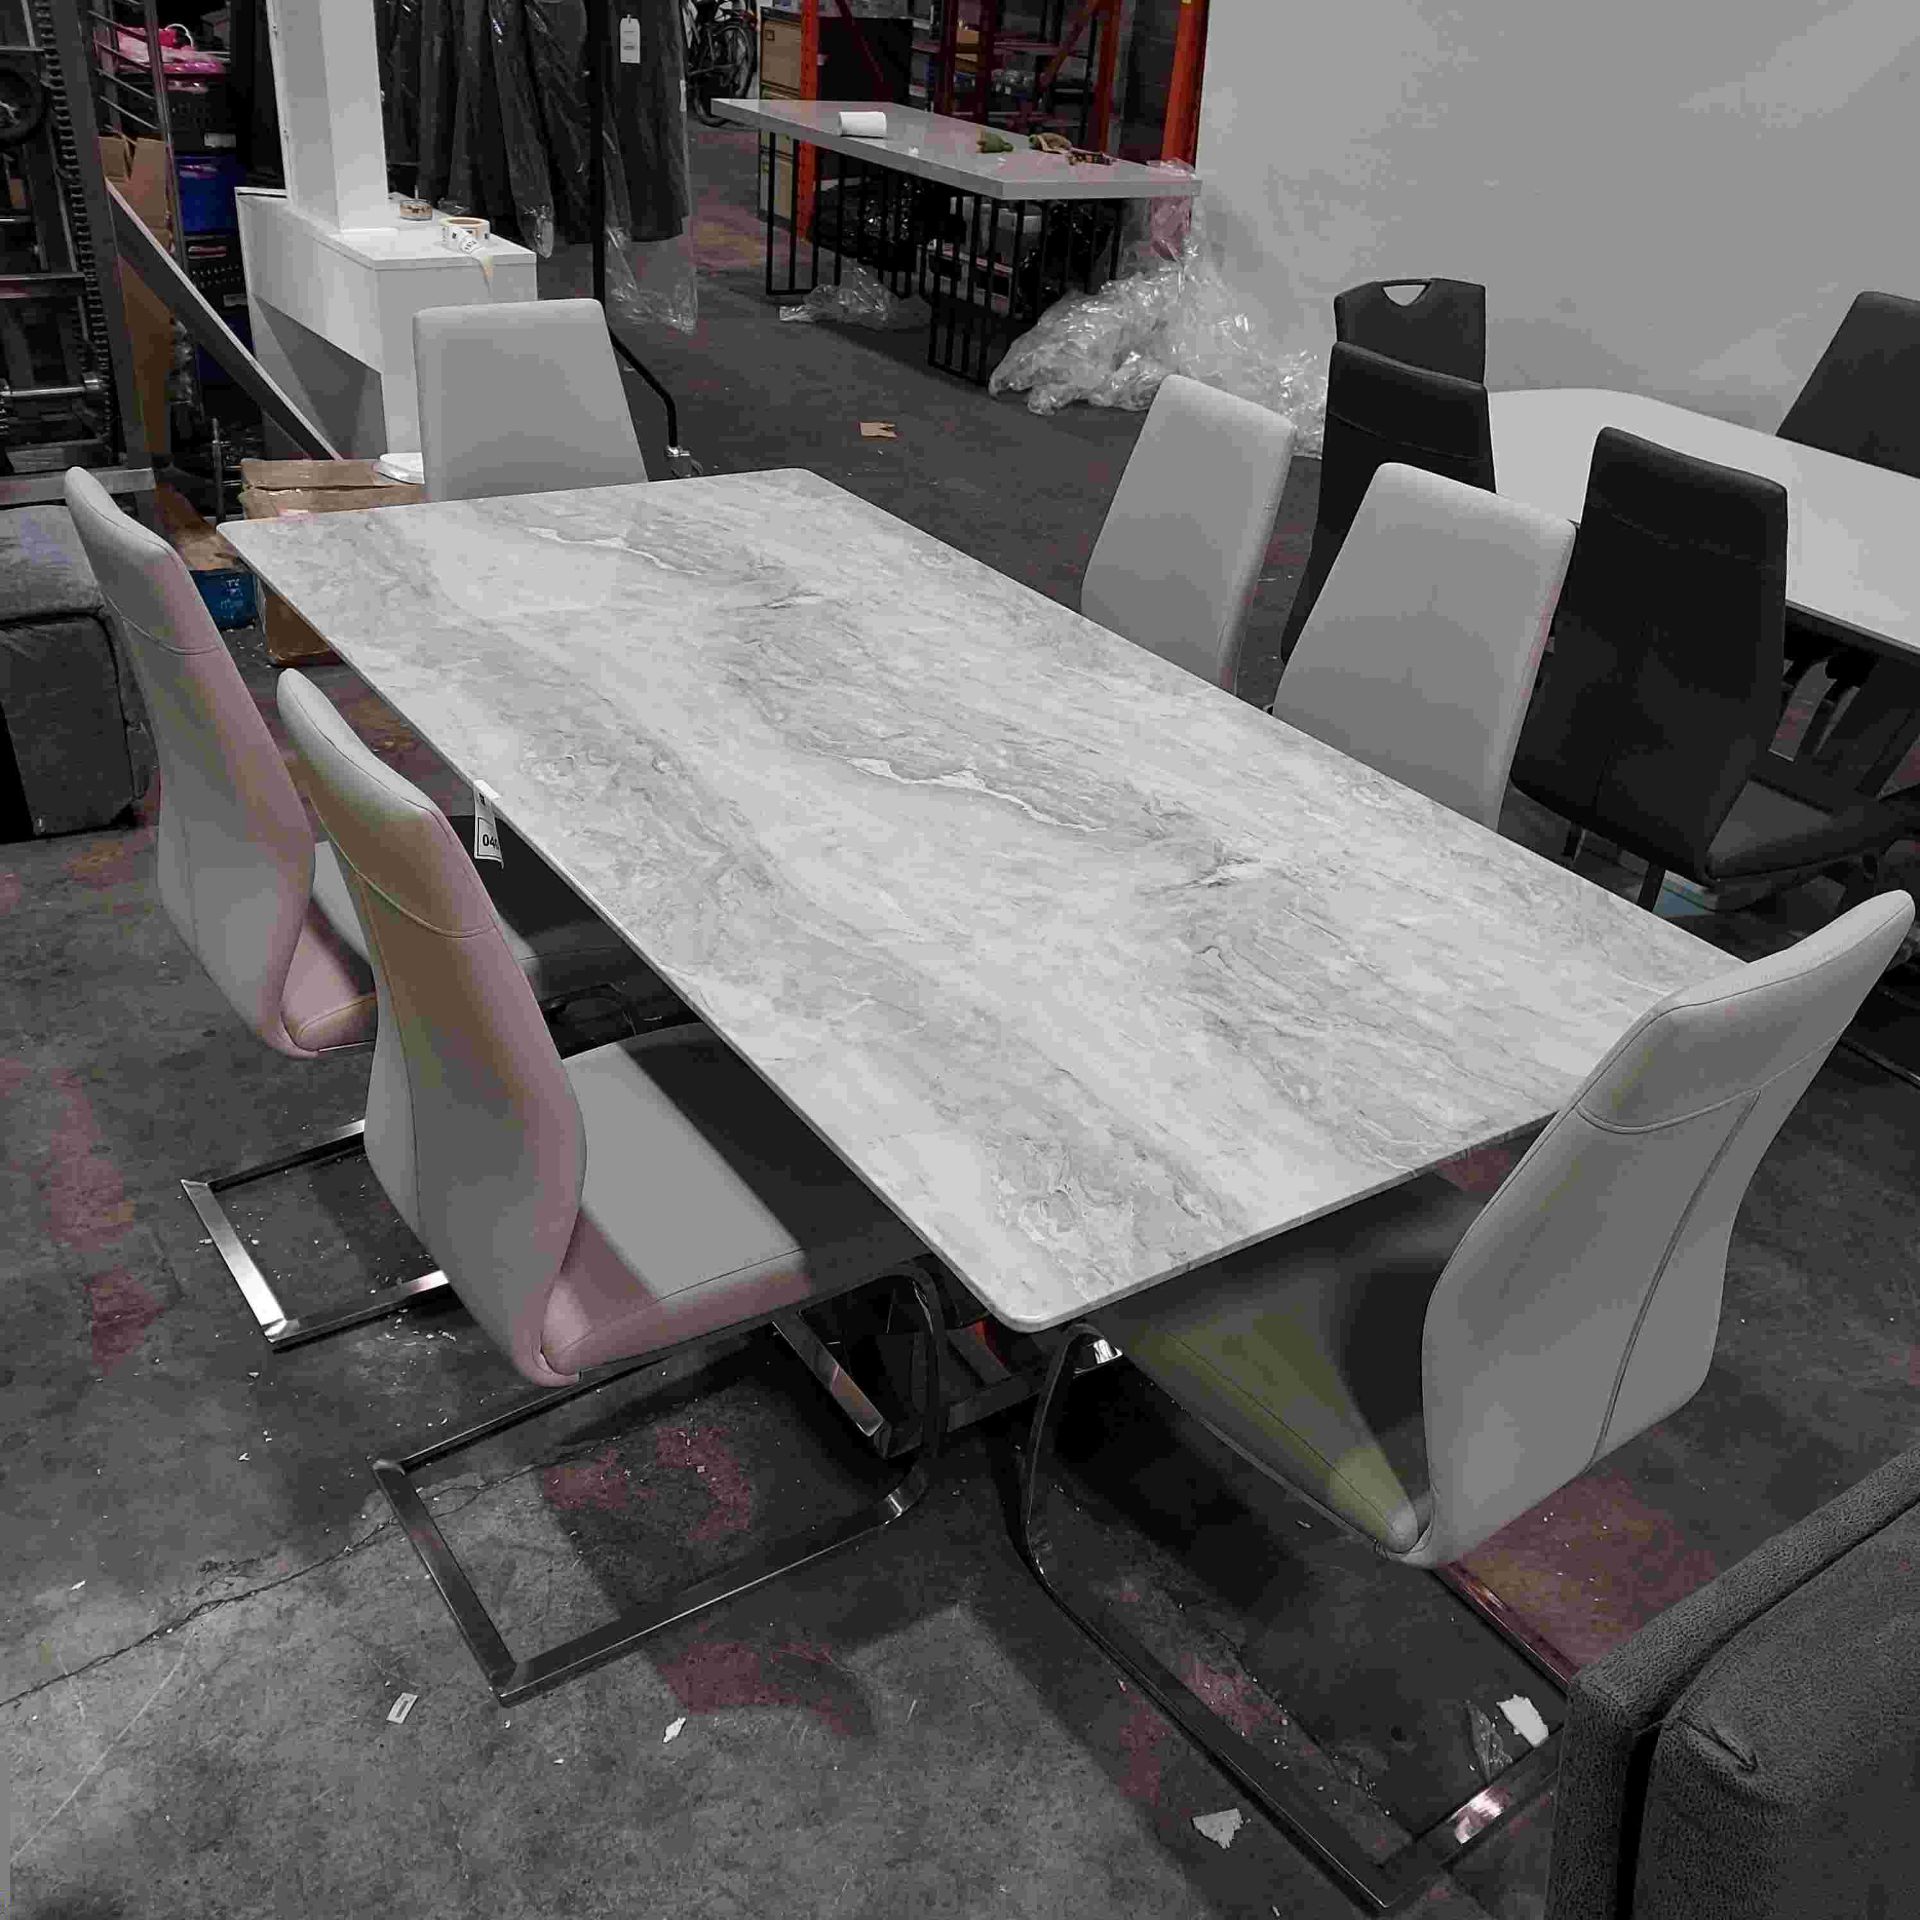 1 X GRANITE TOP TREMMEN DINING TABLE IN MILAN GREY ( L 200 CM X W 100 CM X H 77 CM ) WITH 6 FAUX